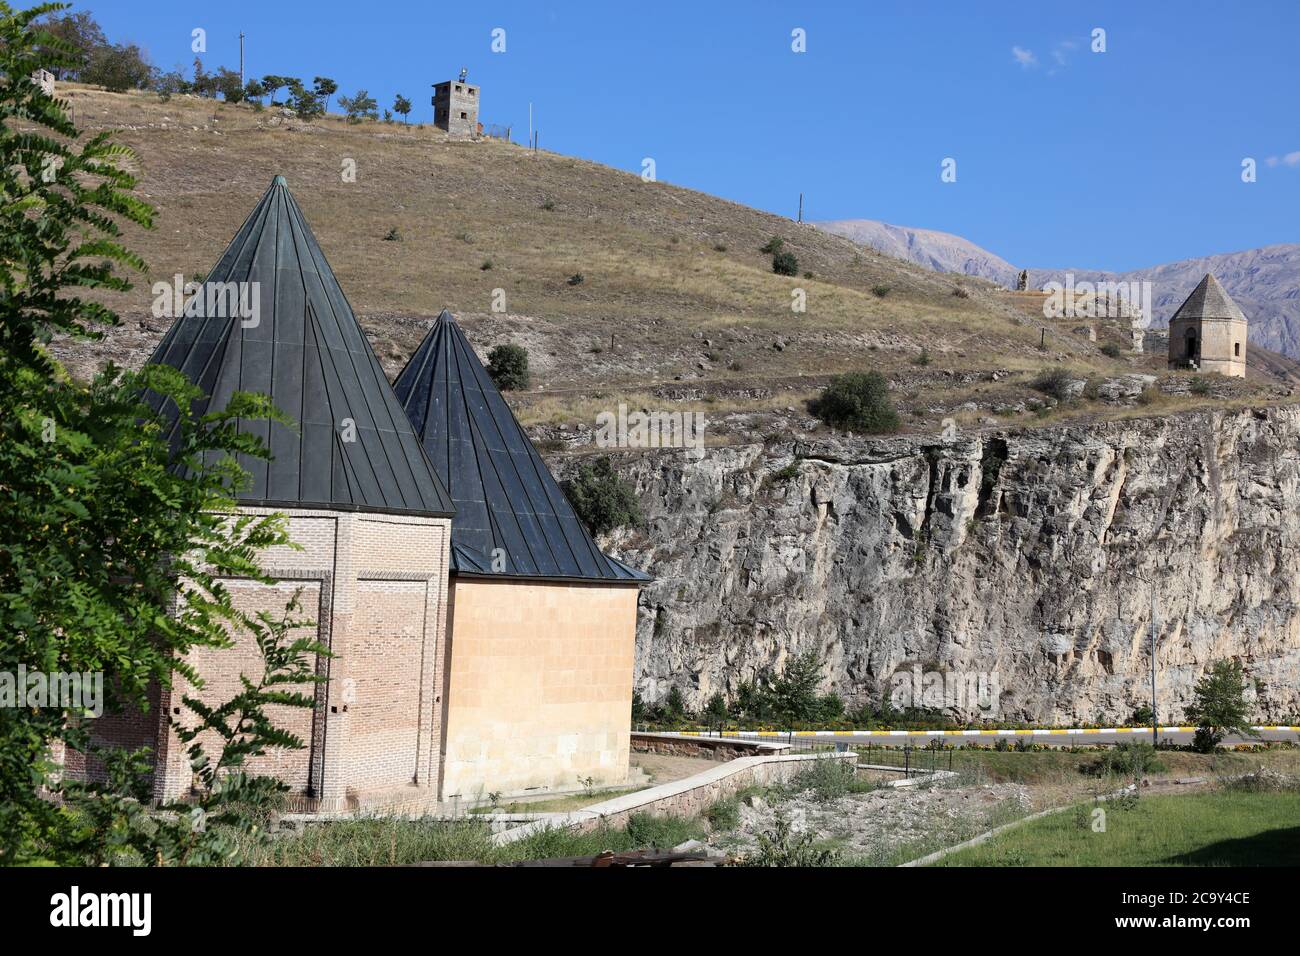 Melik Gazi Tomb is located on the edge of the Karasu River. The tomb was built at the end of the 12th century during the Seljuk period. Kemah, Turkey. Stock Photo